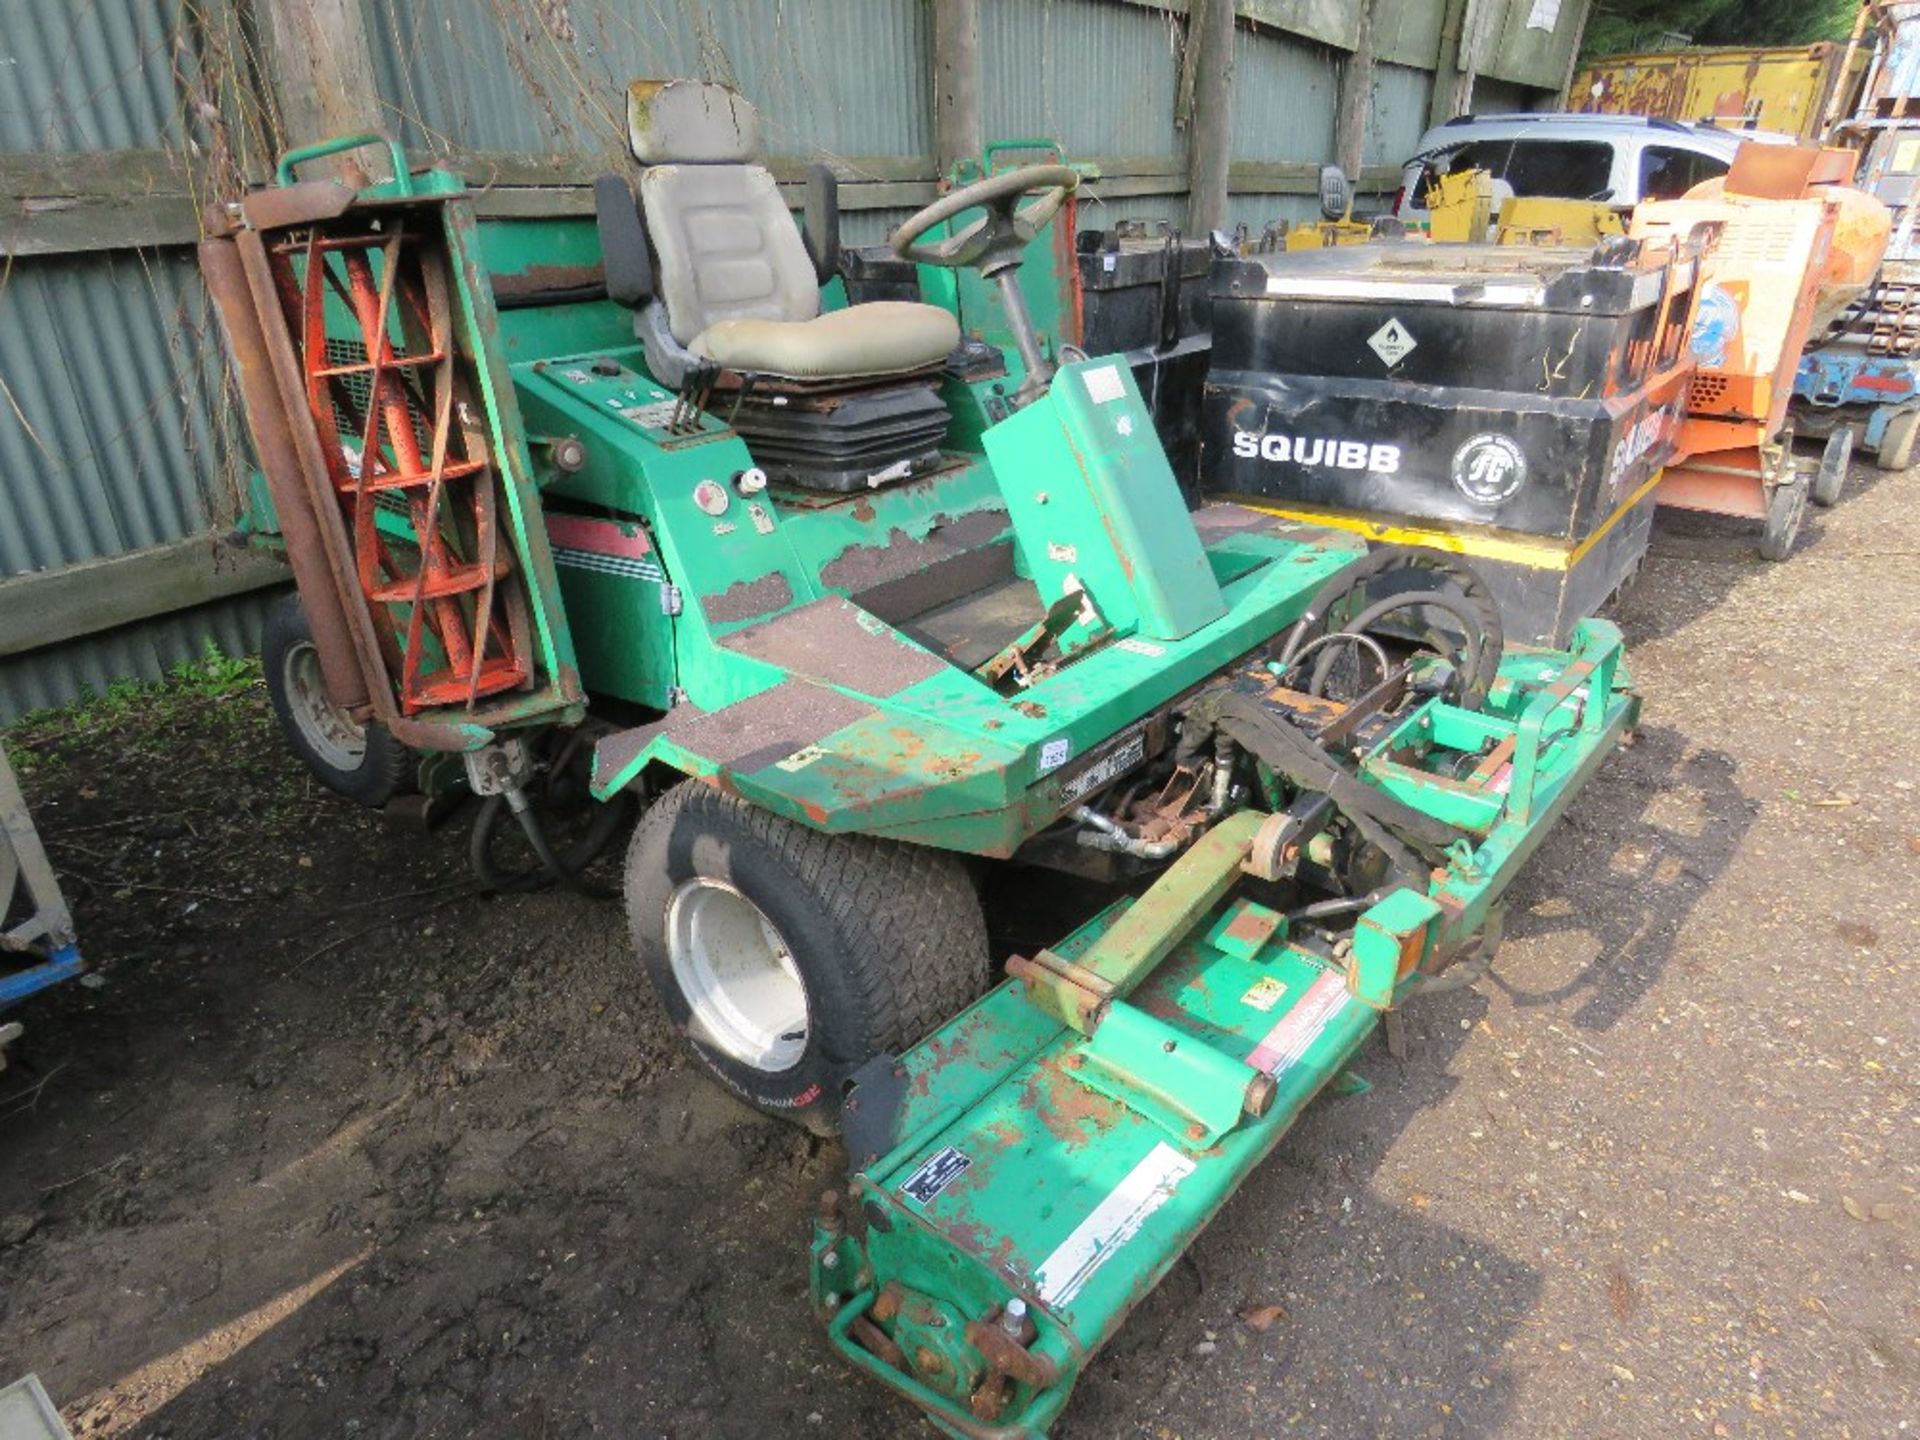 RANSOMES 520 5 GANG RIDE ON CYLINDER MOWER WITH KUBOTA ENGINE. WHEN TESTED WAS SEEN TO RUN, DRIVE,